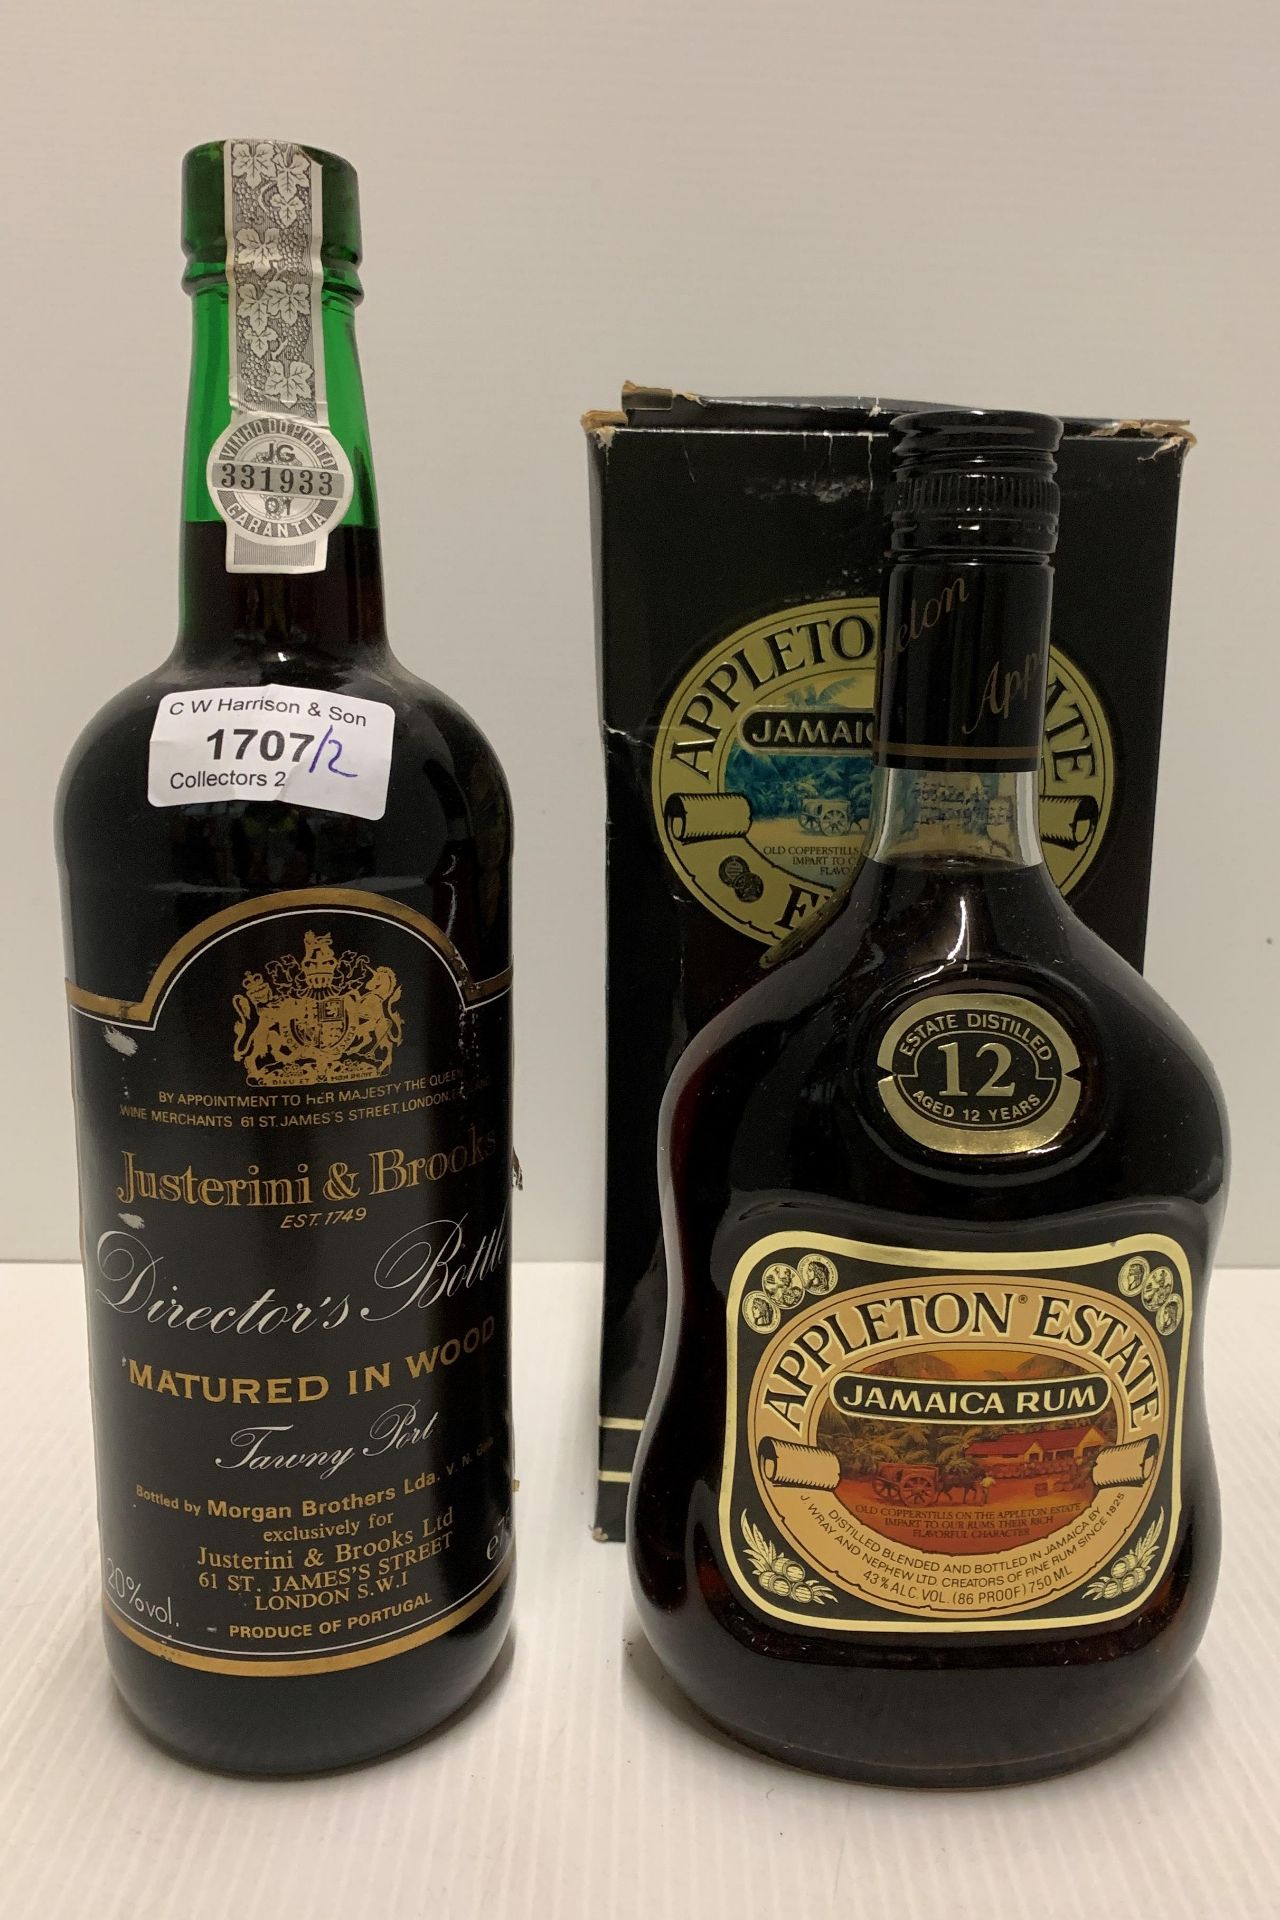 A 75cl bottle of Justerini and Brooks Directors bottle Tawny Port (20% volume) and a 750ml bottle